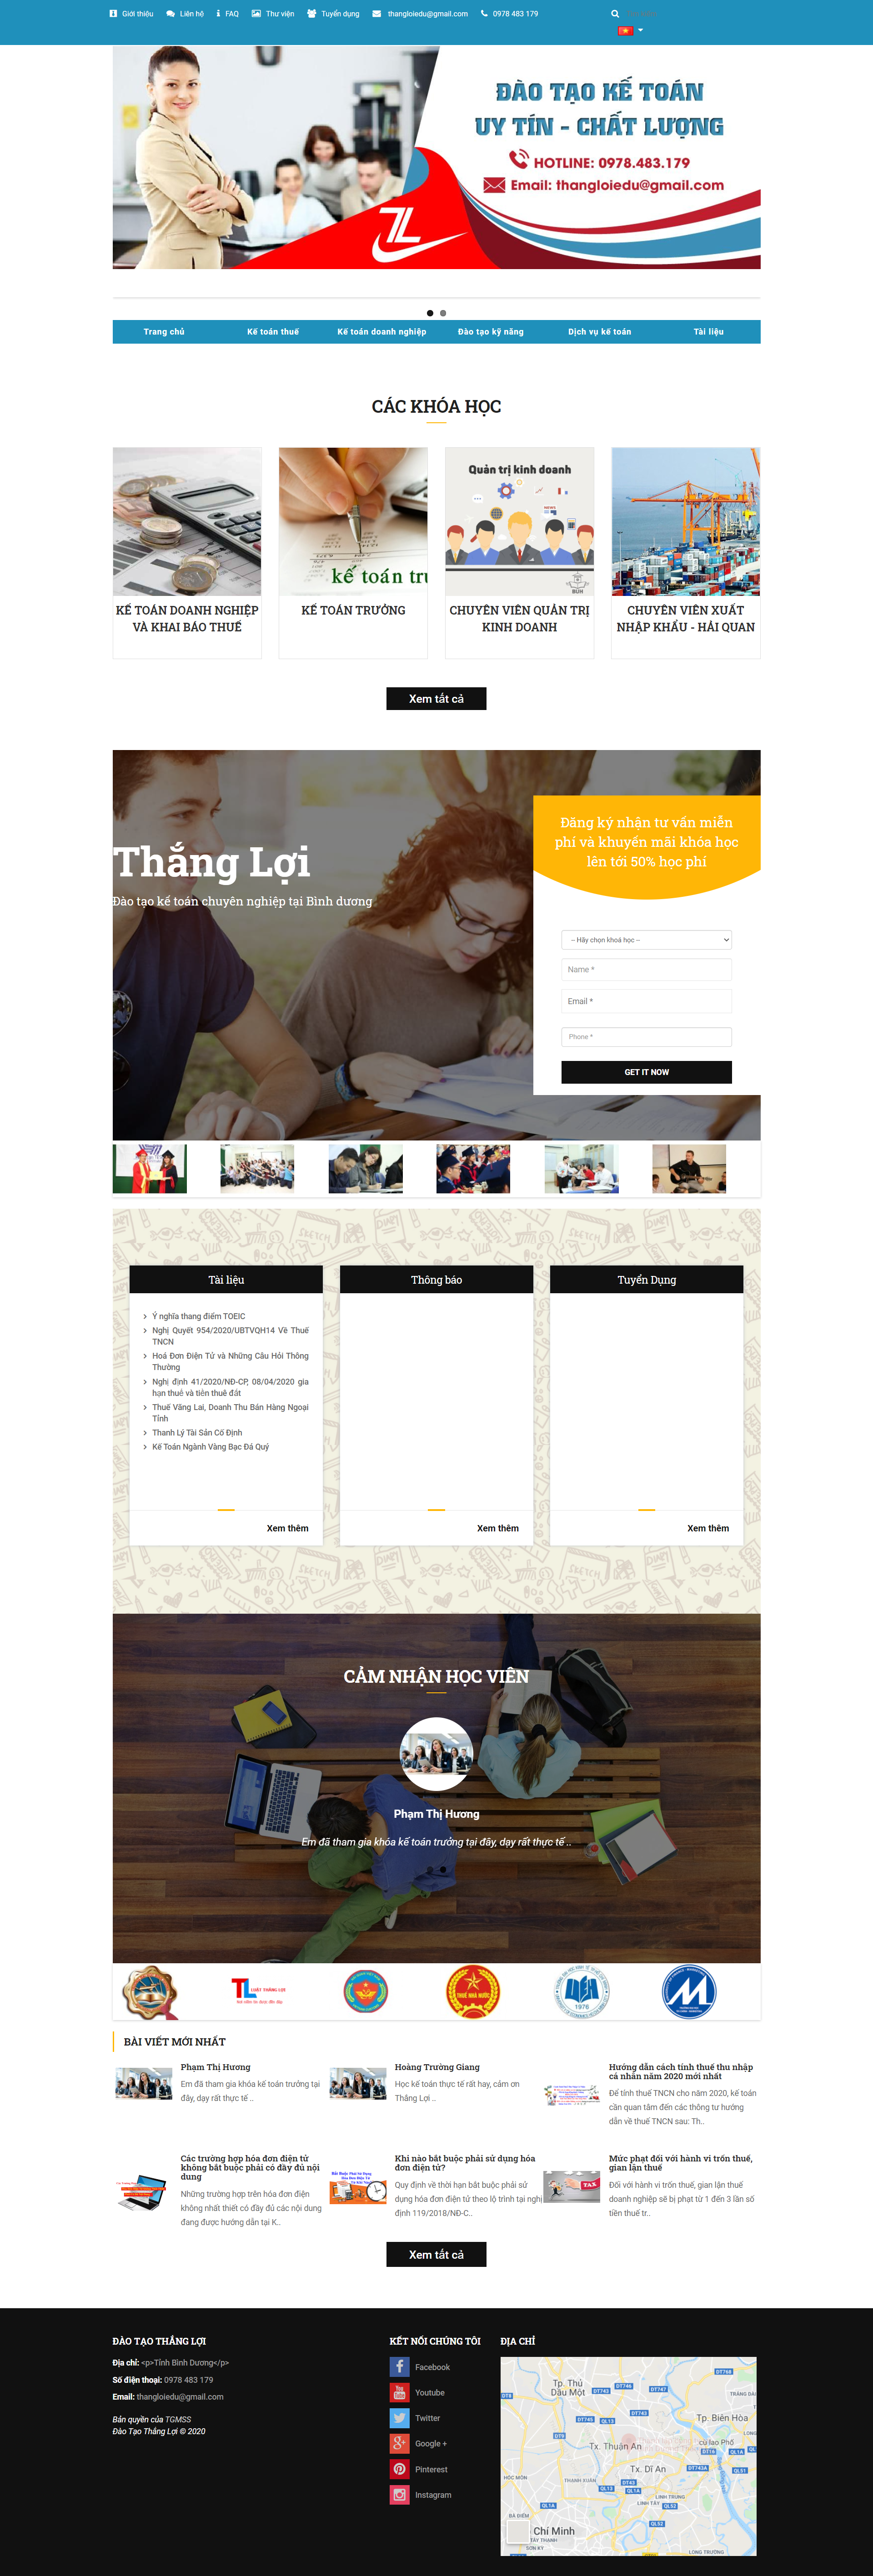 Thiết kế website Thangloi